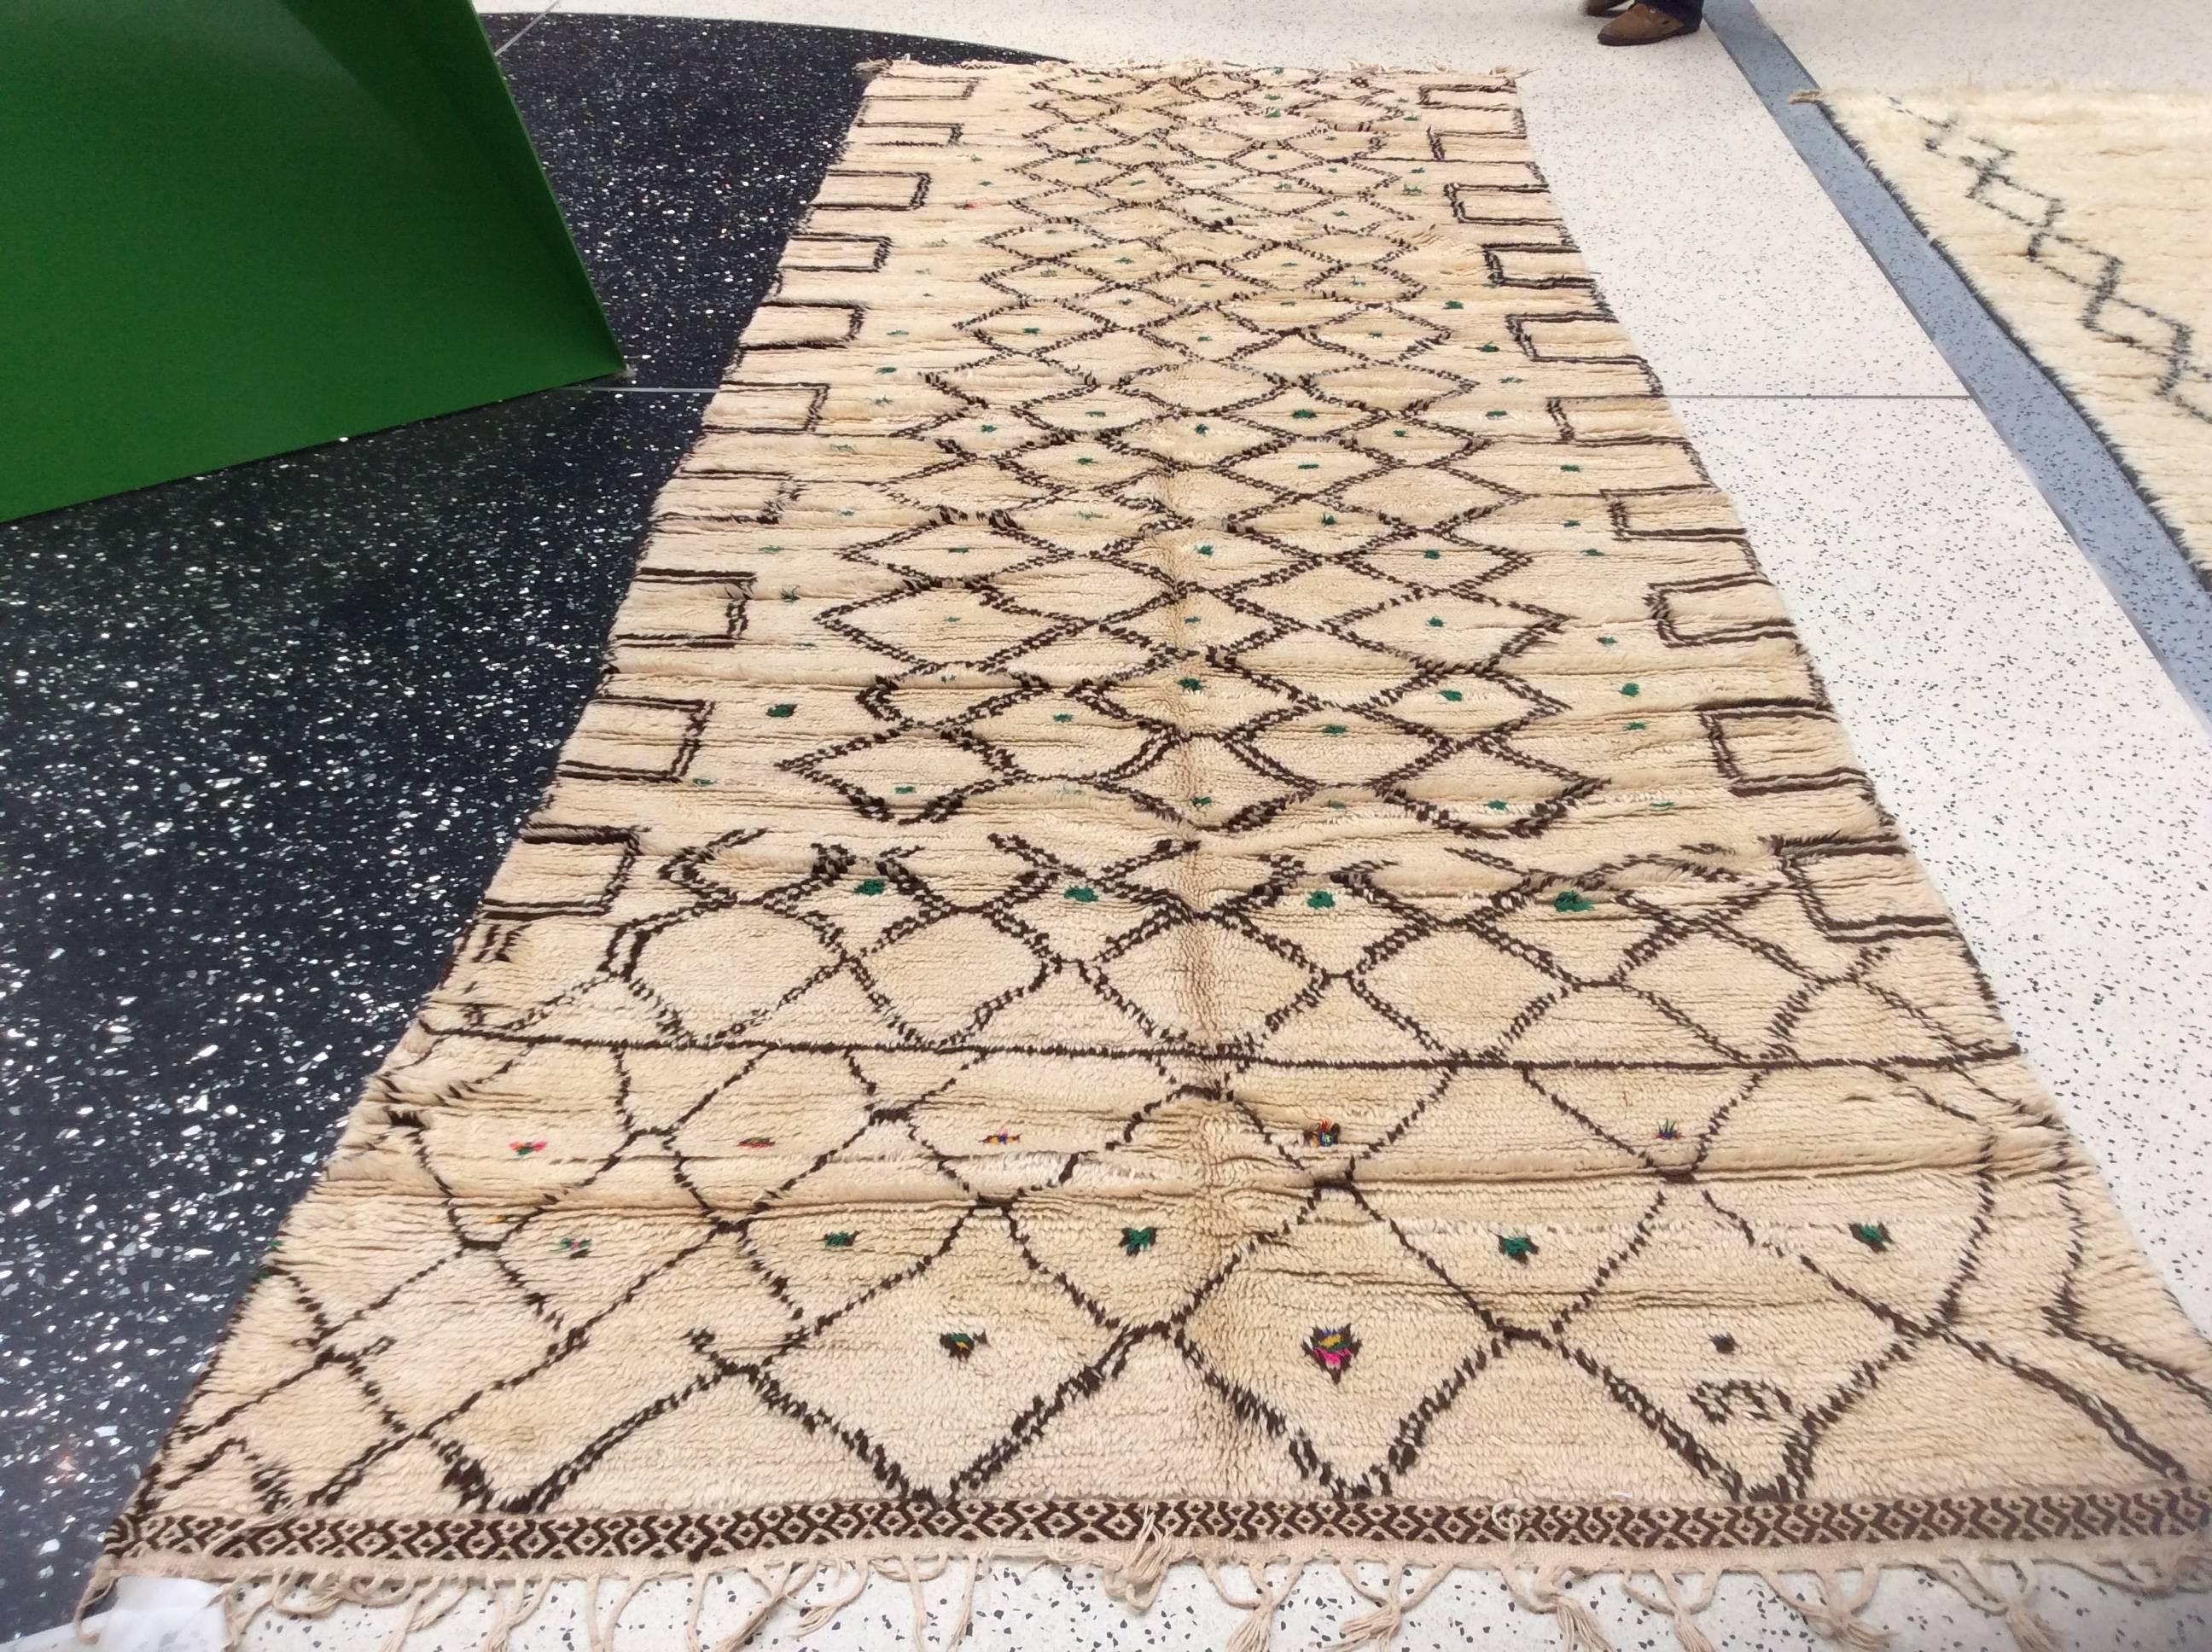 Moroccan runner with green dots

A weaving technique that has been passed down from generations to generations makes Moroccan Berber rug such a fine addition to your collection. It is made of luxurious hand-spun wool by the high atlas tribe, no 2